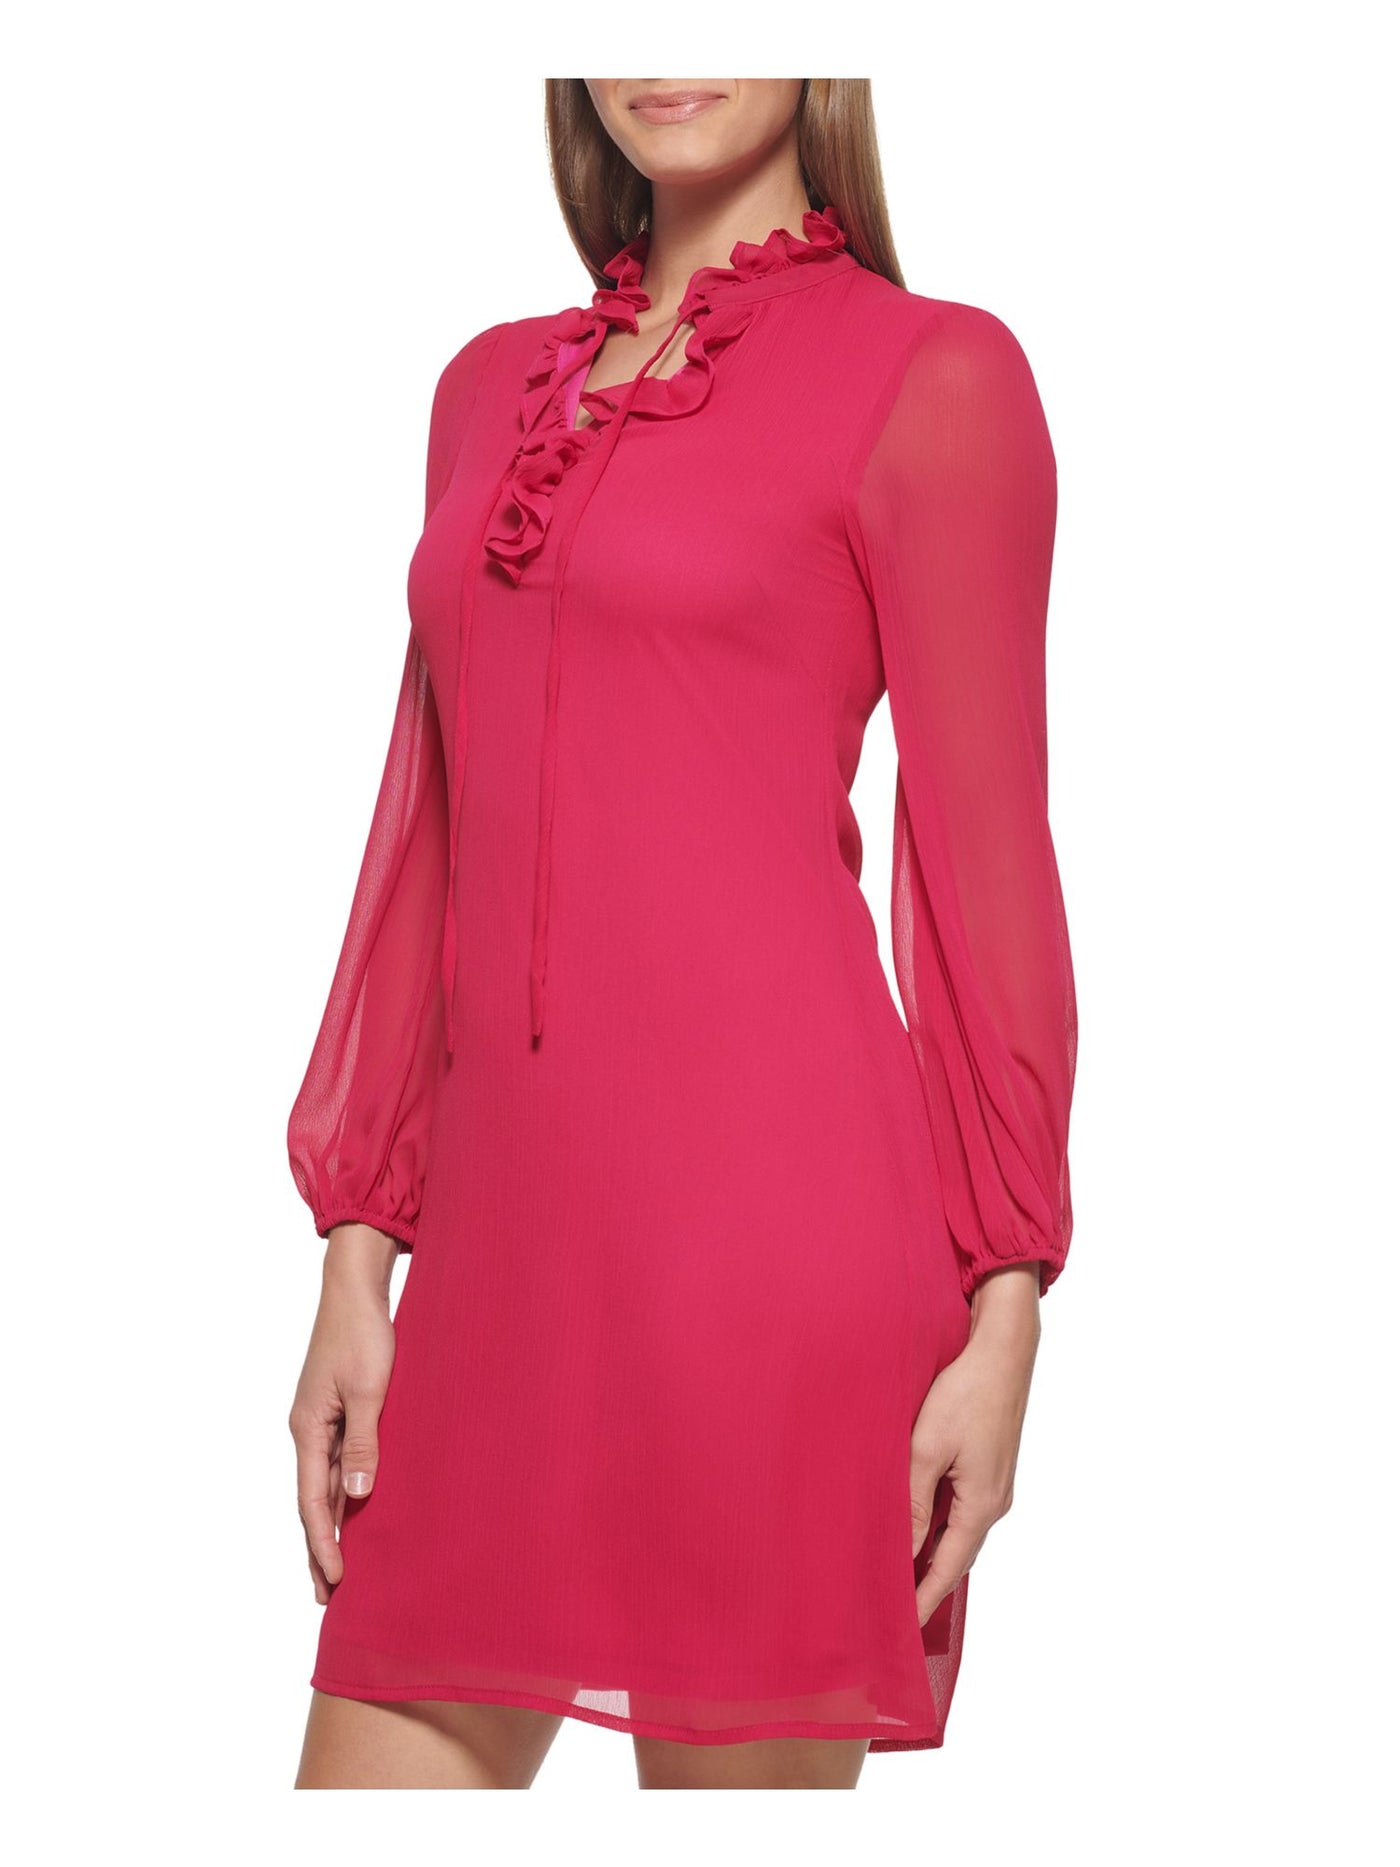 DKNY Womens Pink Ruffled Sheer Lined Tie Front Long Sleeve V Neck Above The Knee Wear To Work Sheath Dress 4